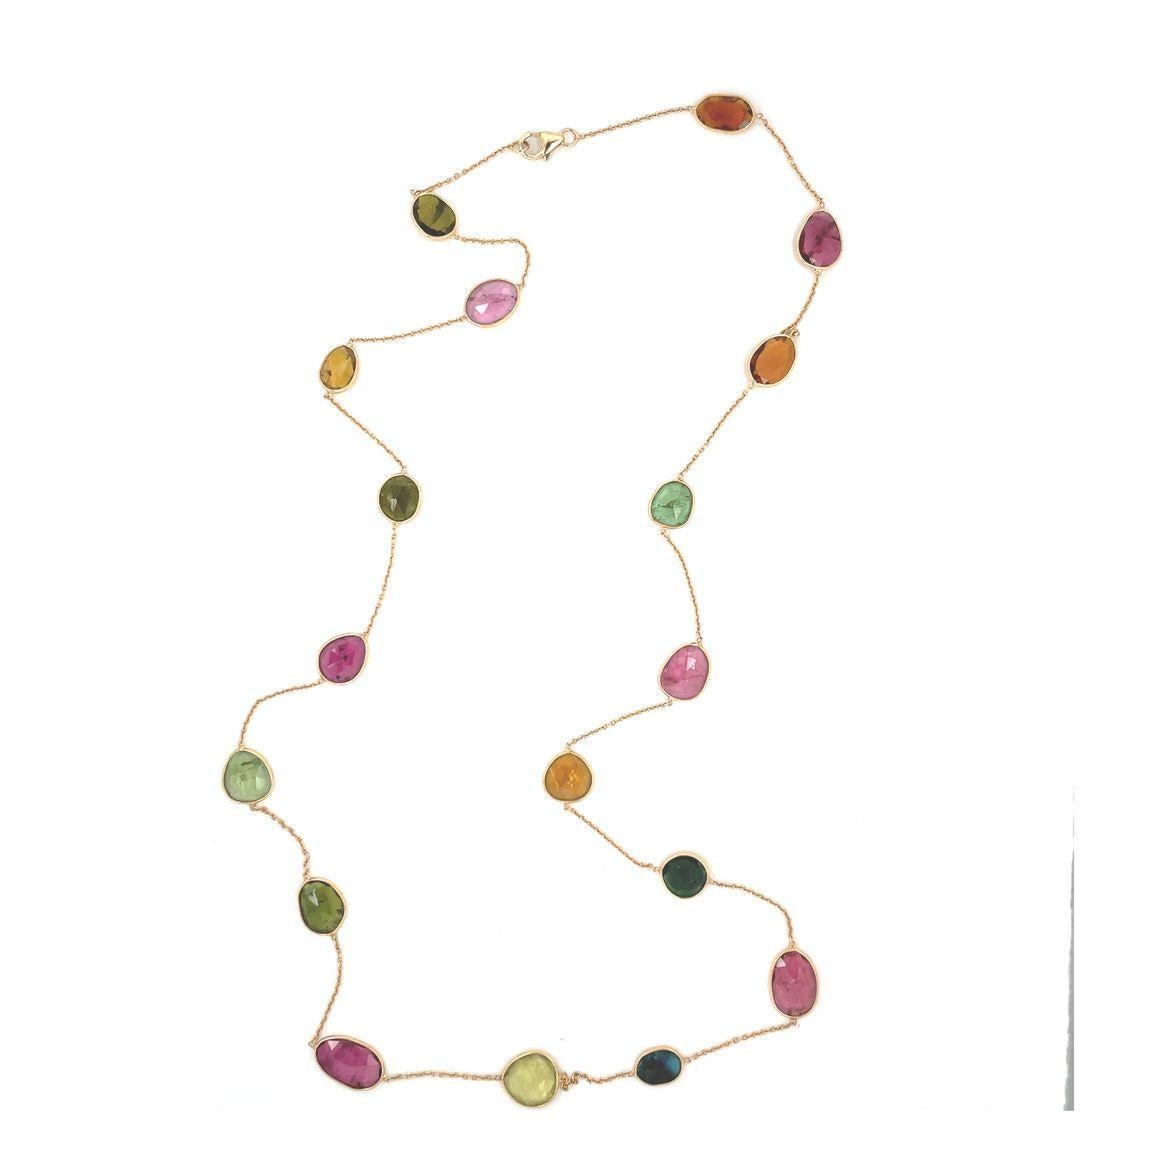 A magnificent one-of-a-kind necklace brilliantly sparkles with multicolored tourmalines in a variety of cuts and shapes. Stunning colorful mix of shaped multi-color Tourmaline is hand set in fine bezel setting to accentuate the natural color of